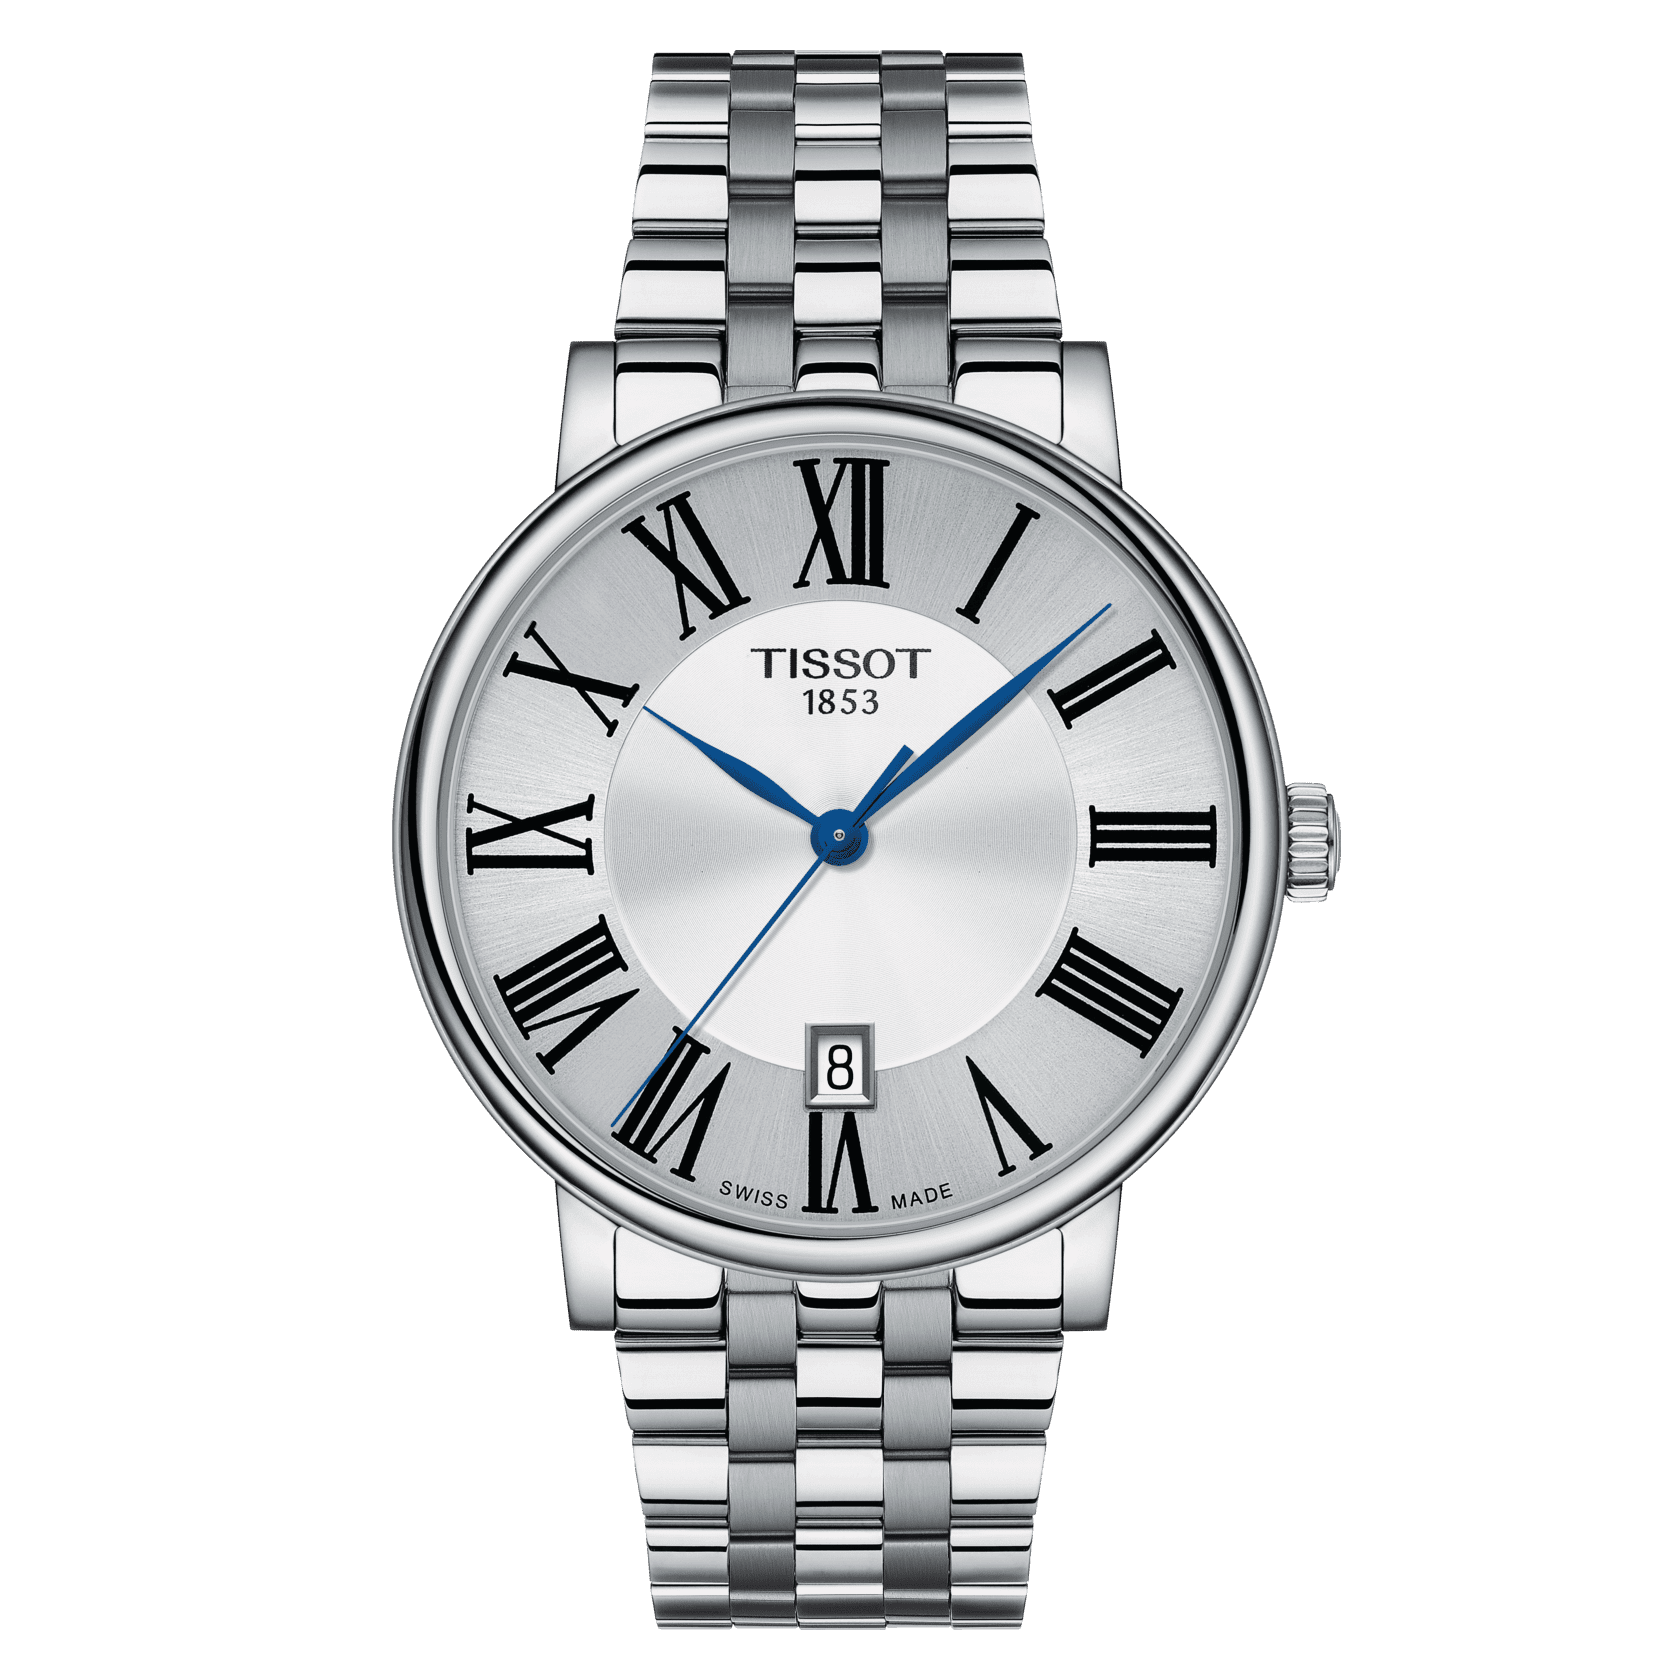 TISSOT CARSON PREMIUM QUARTZ (T122.410.11.033.00)
Case 40mm/316L stainless steel case
Crystal Scratch-resistant sapphire crystal
Movement Swiss quartz/ETA F06.115
Dial Silver dial with roman indexes
Strap details Stainless steel with butterfly clasp